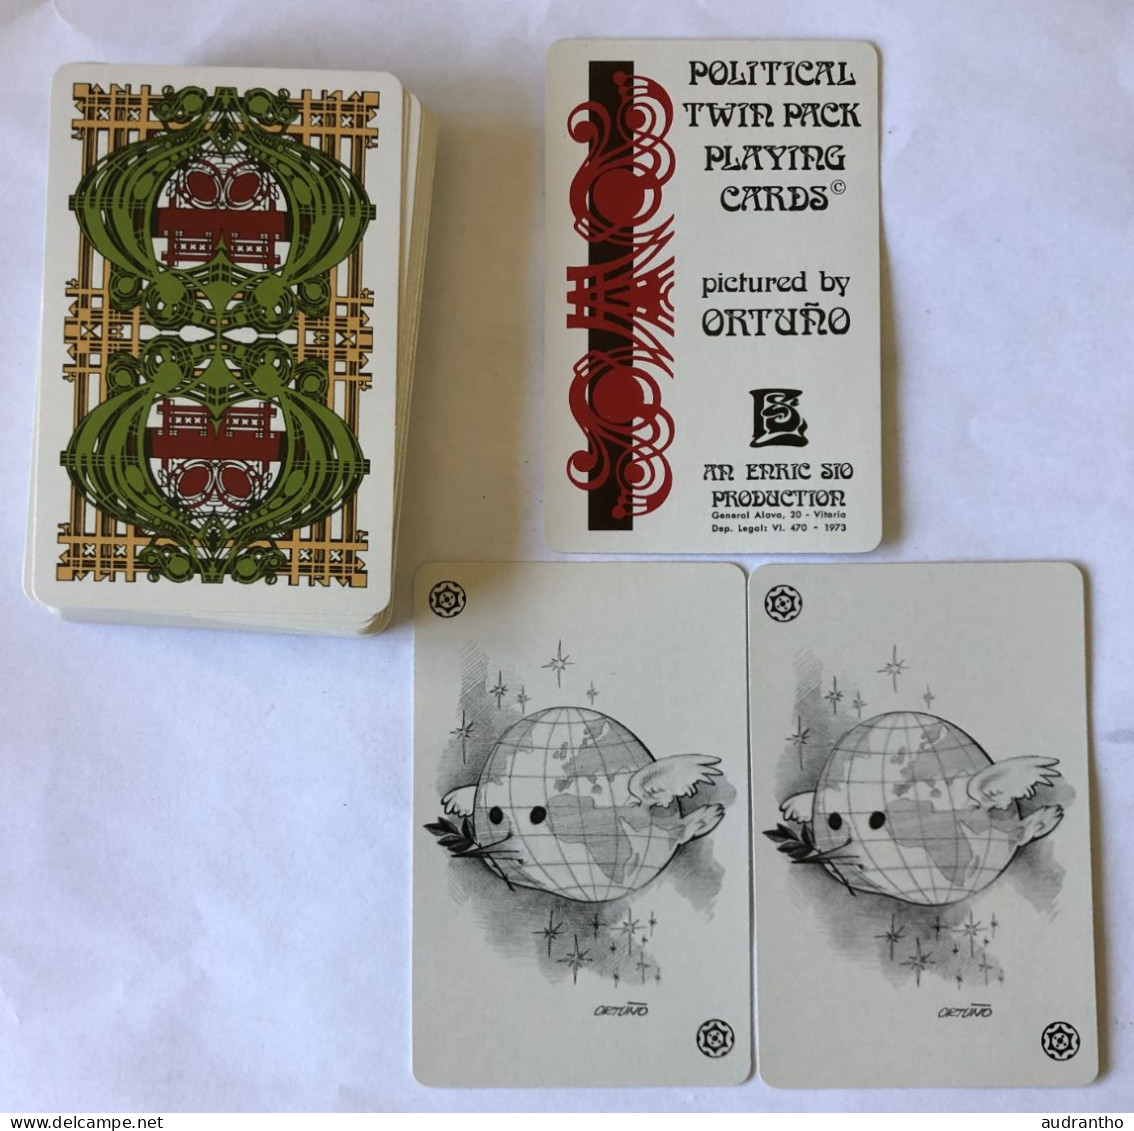 Très Beau Double Jeu 54 Cartes 1973 - Caricature Personnalité - Political Twin Pack Playing Cards By ORTUNO - Erric Sio - 54 Carte